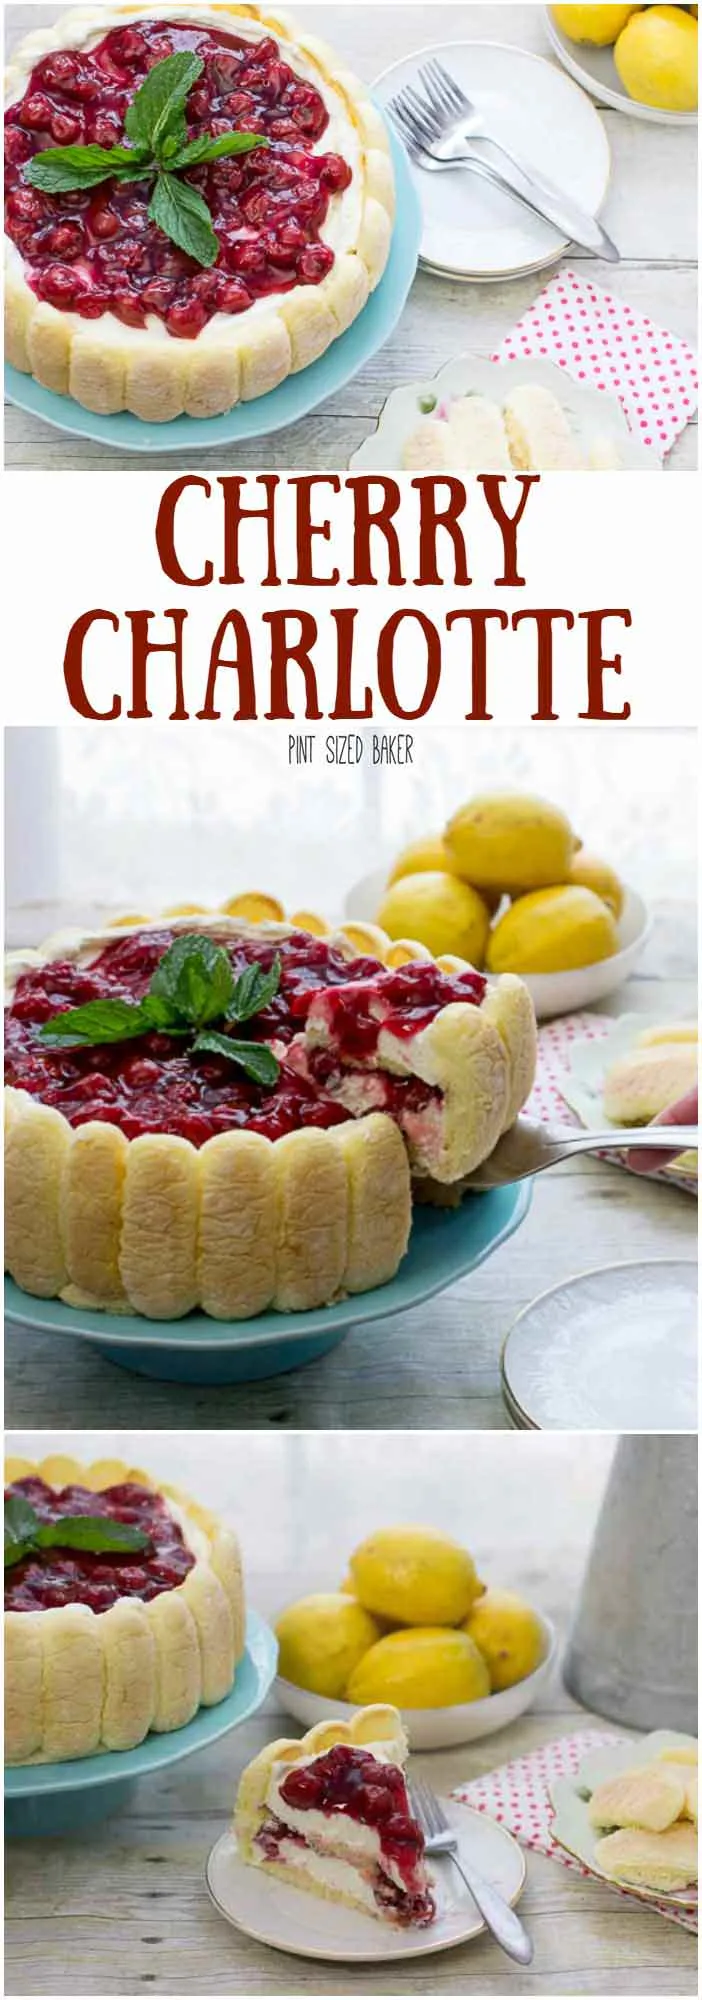 A Long collage image featuring many different views of the Cherry Charlotte Dessert. 